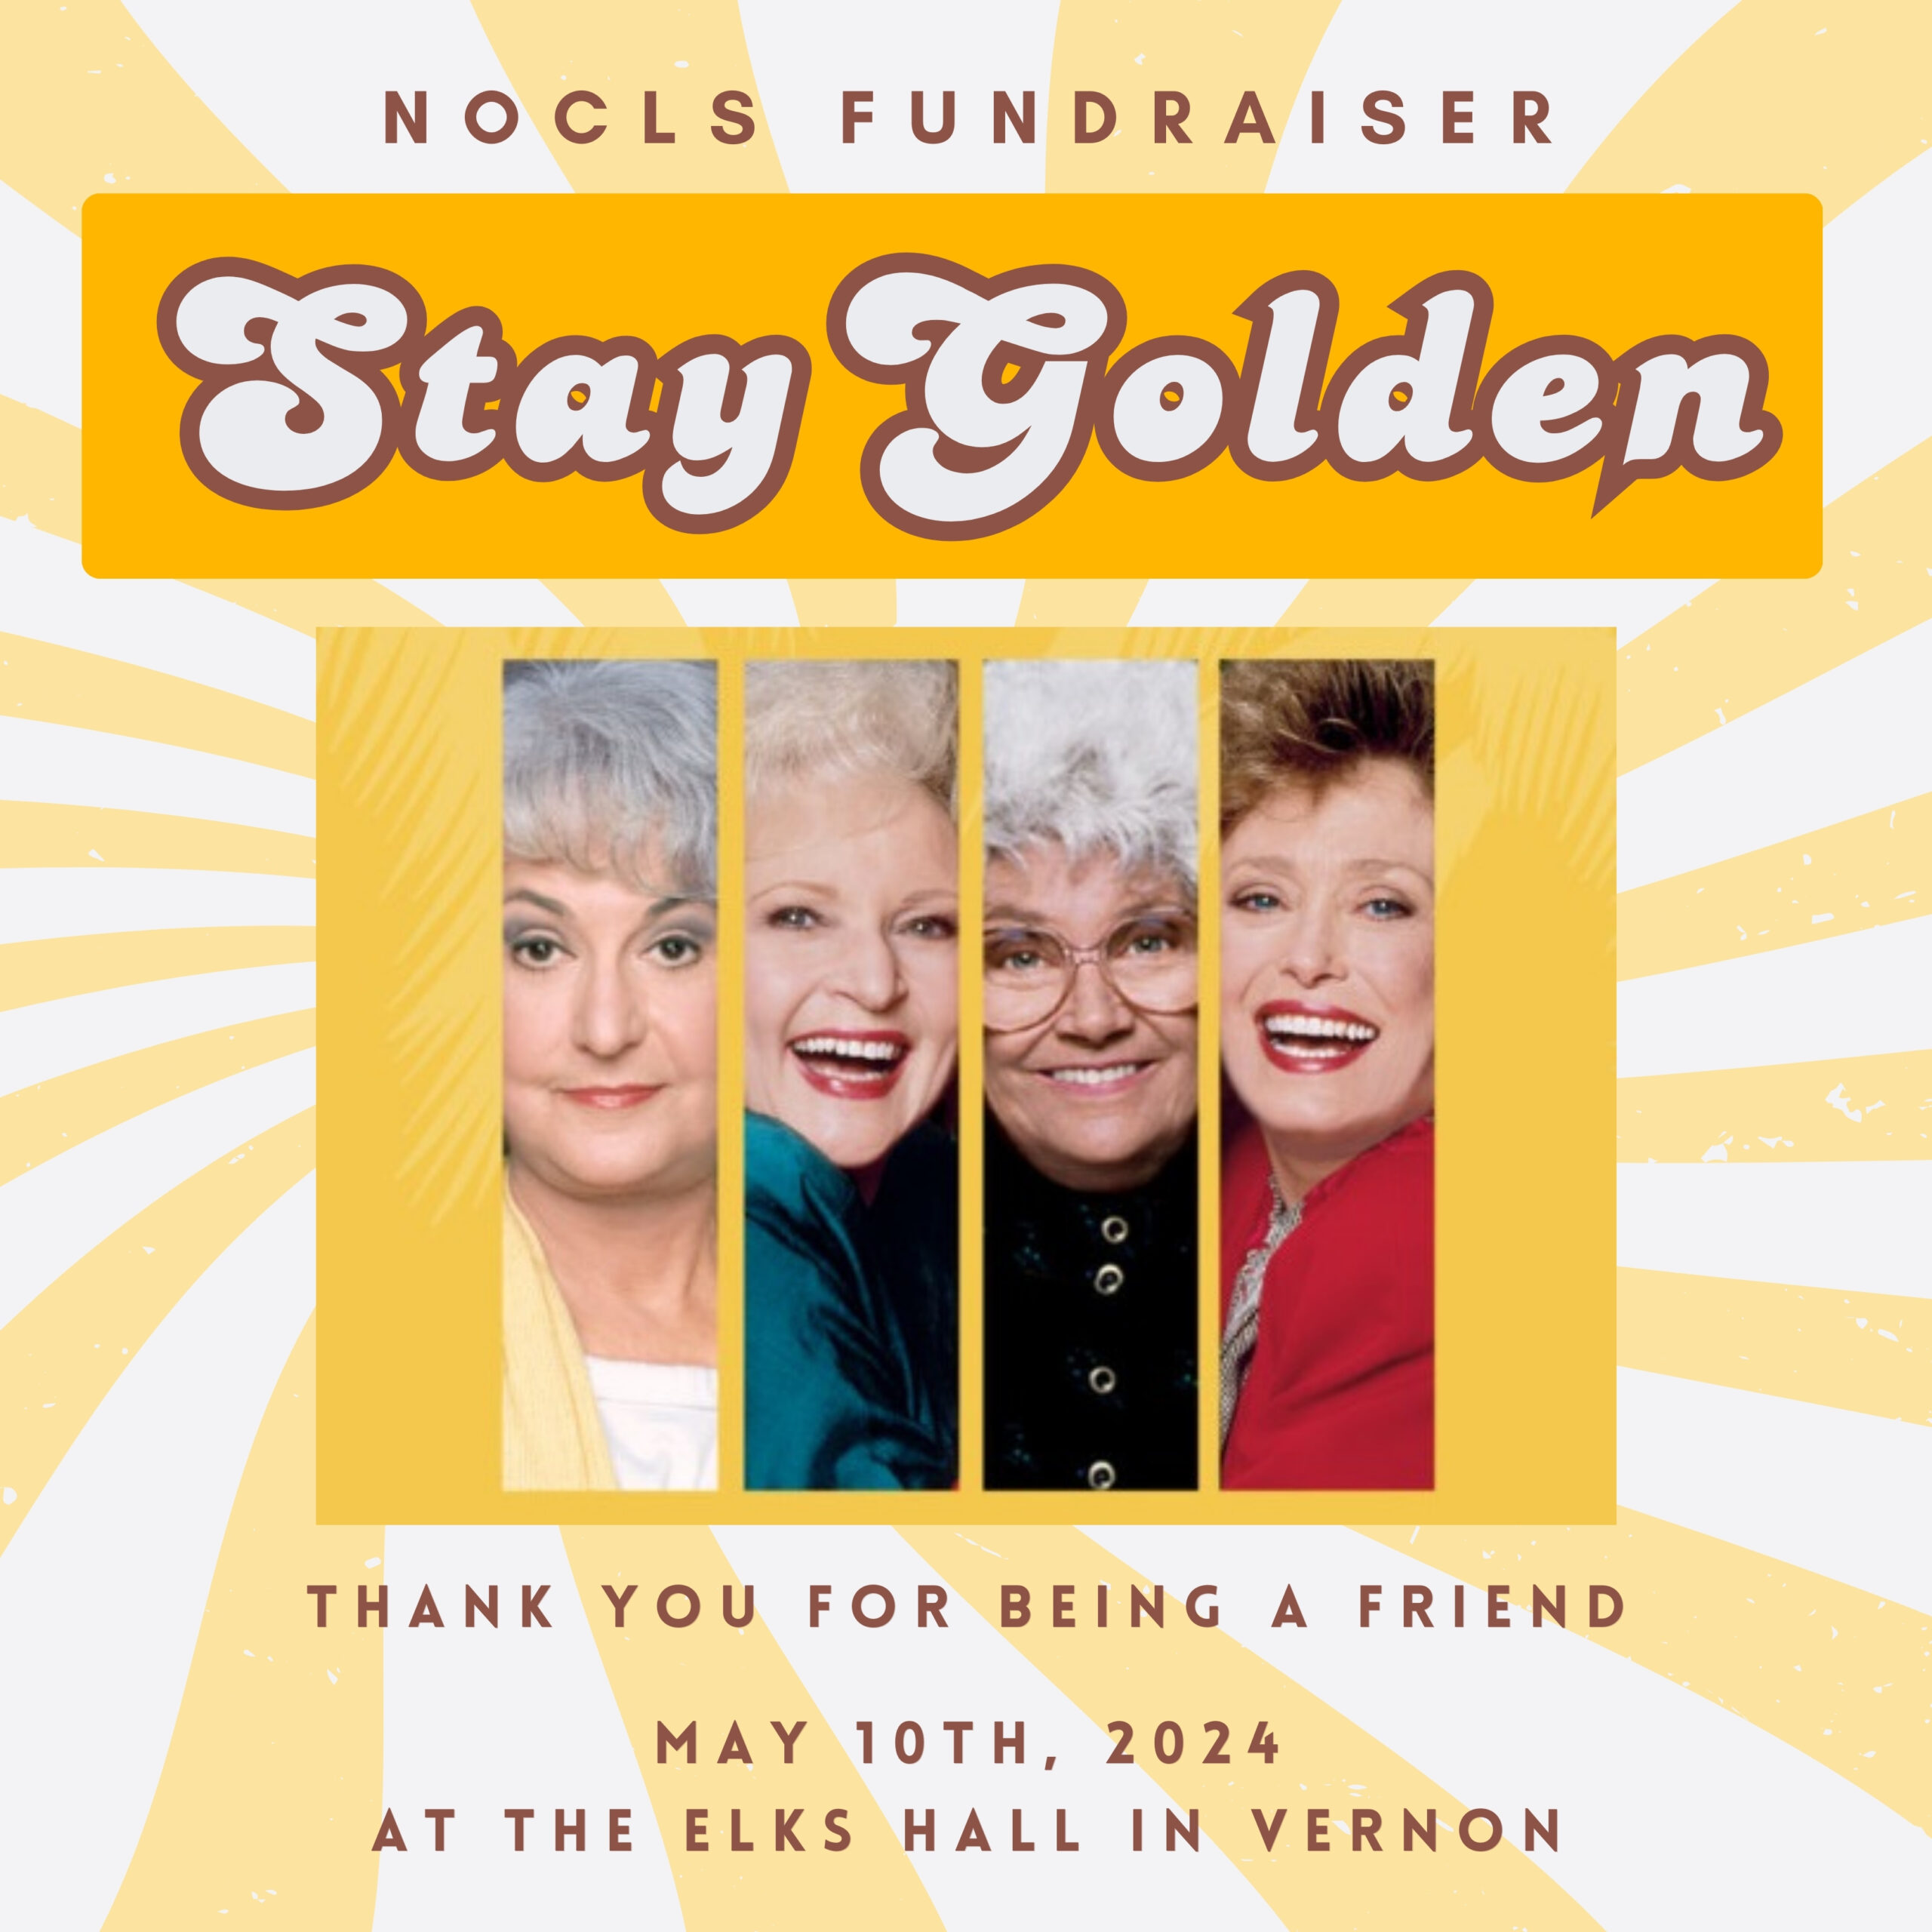 Title image in yellow and white saying "NOCLS Fundraiser Stay Golden" with a photo of all 4 of the Golden Girls. "Thank you for being a friend" and "May 10th, 2024 at the Elks Hall in Vernon"